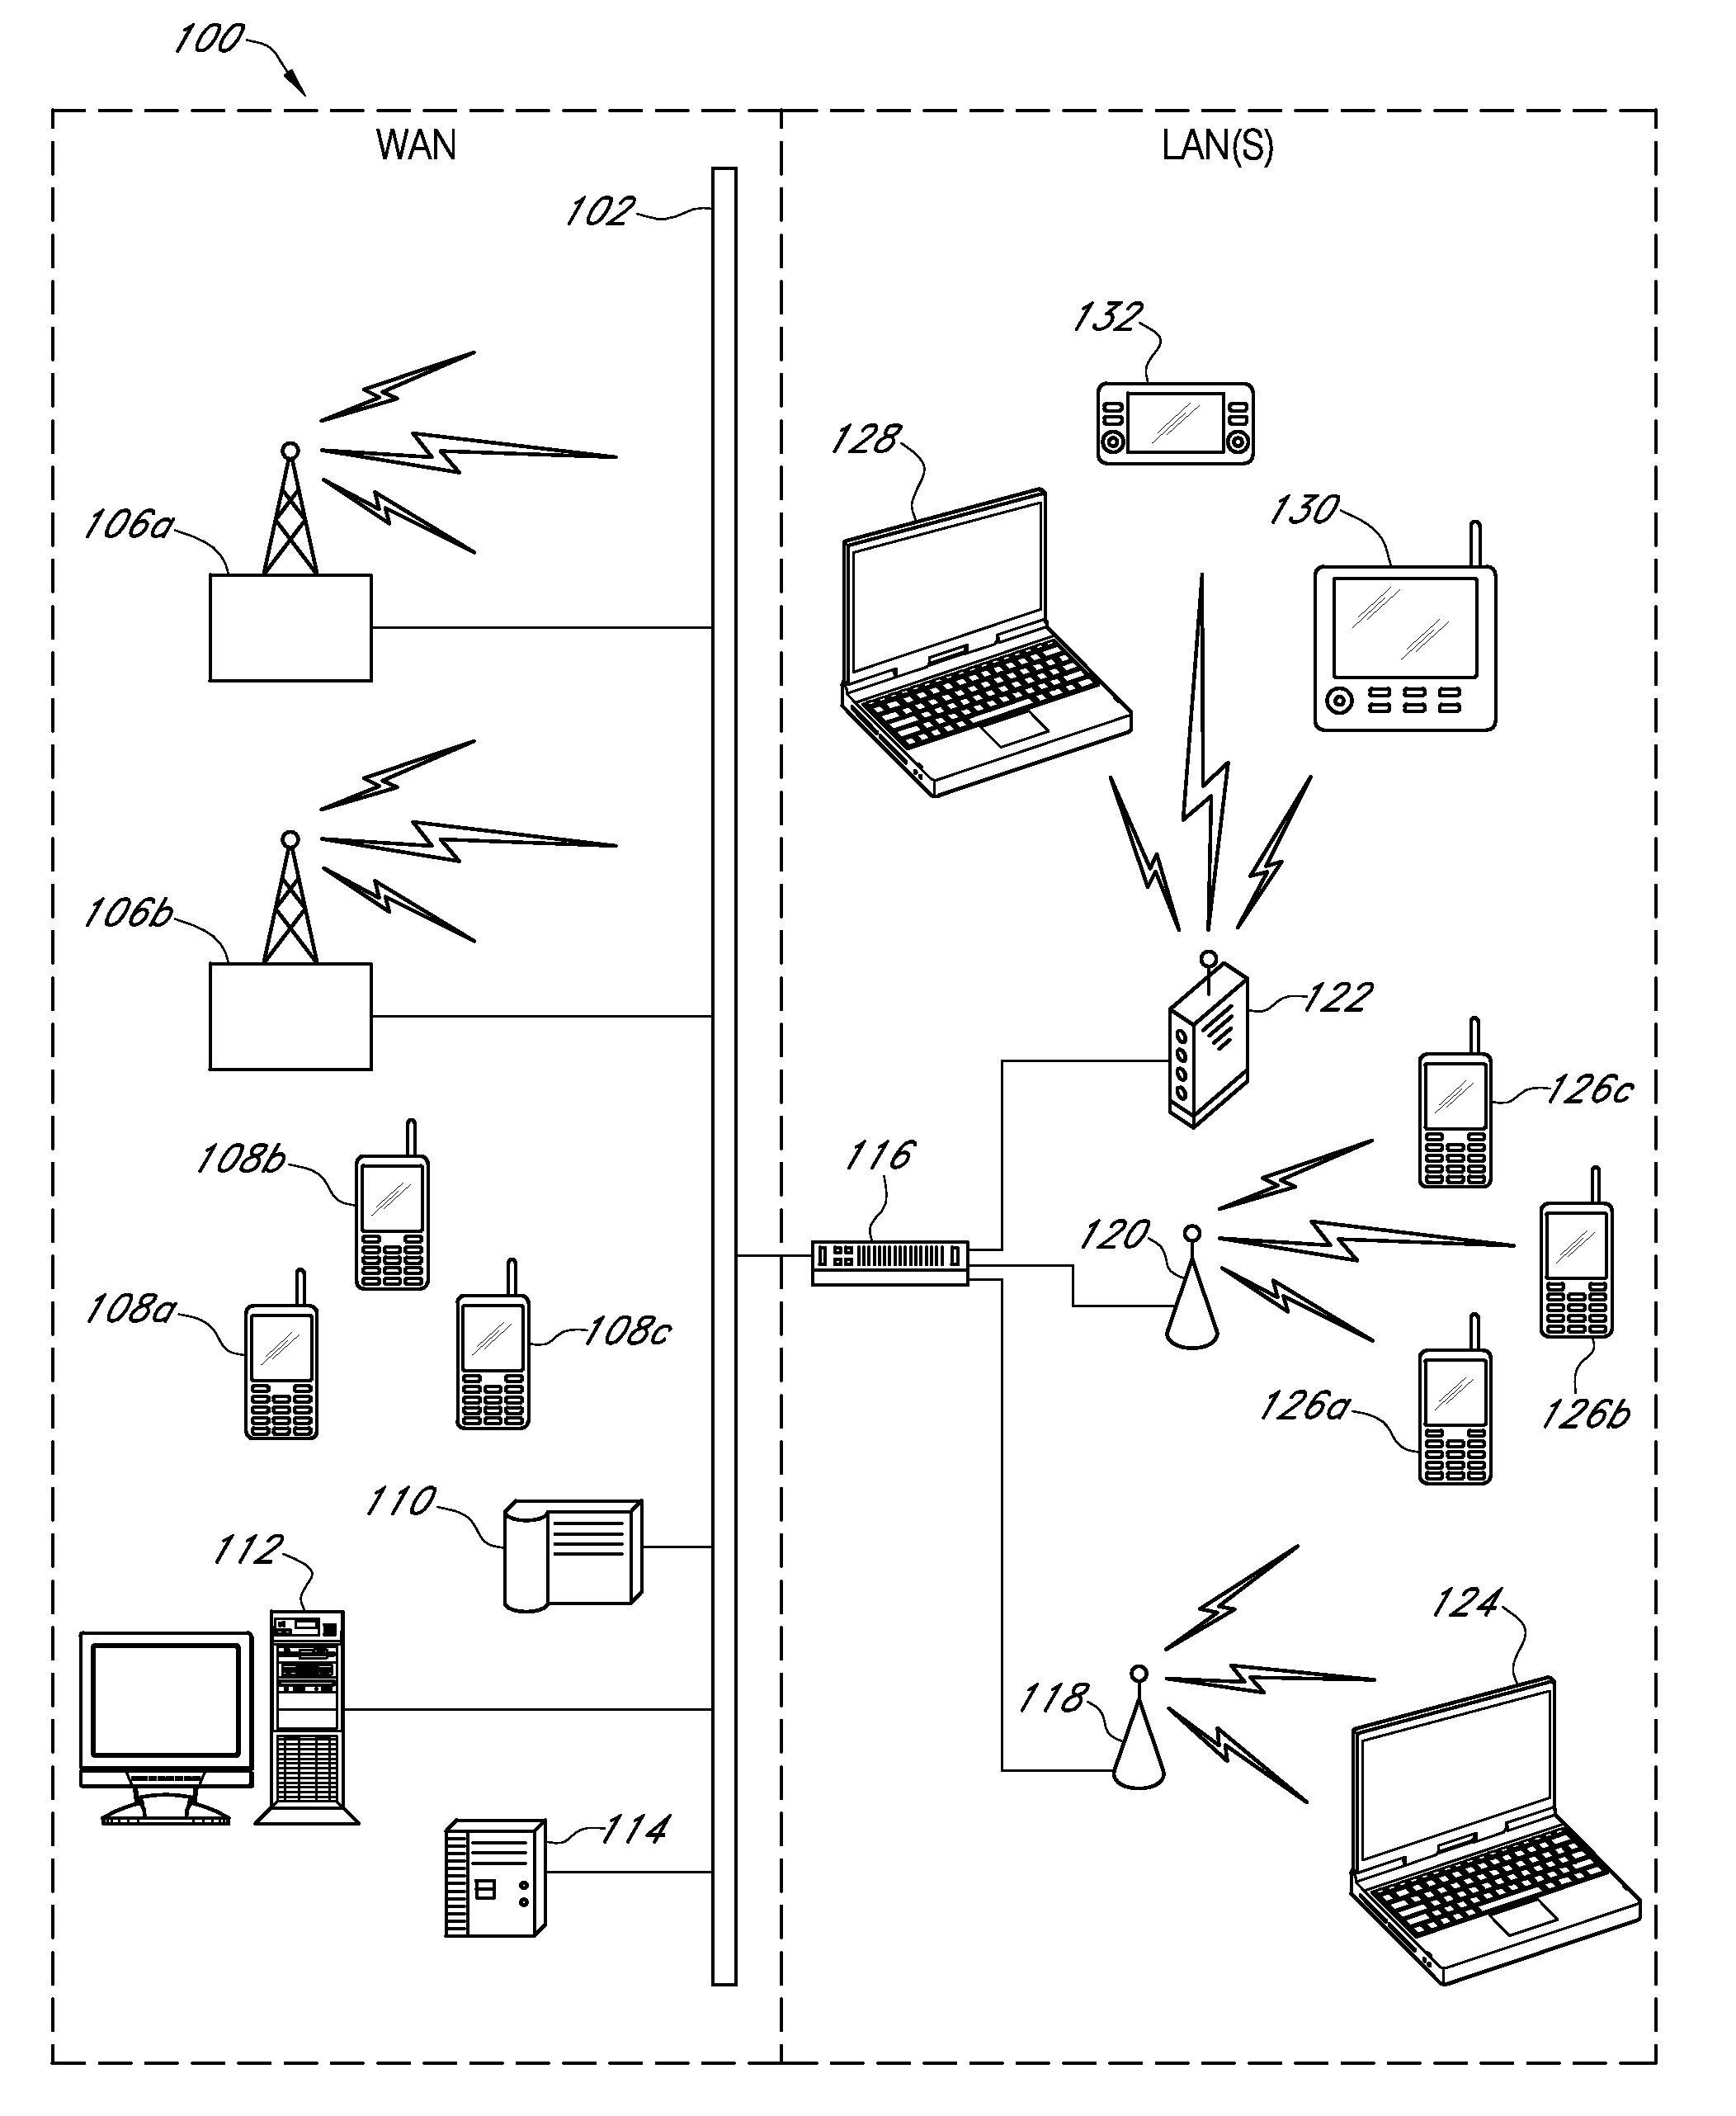 Systems and methods for managing radio resources using extended management information bases in wireless networks